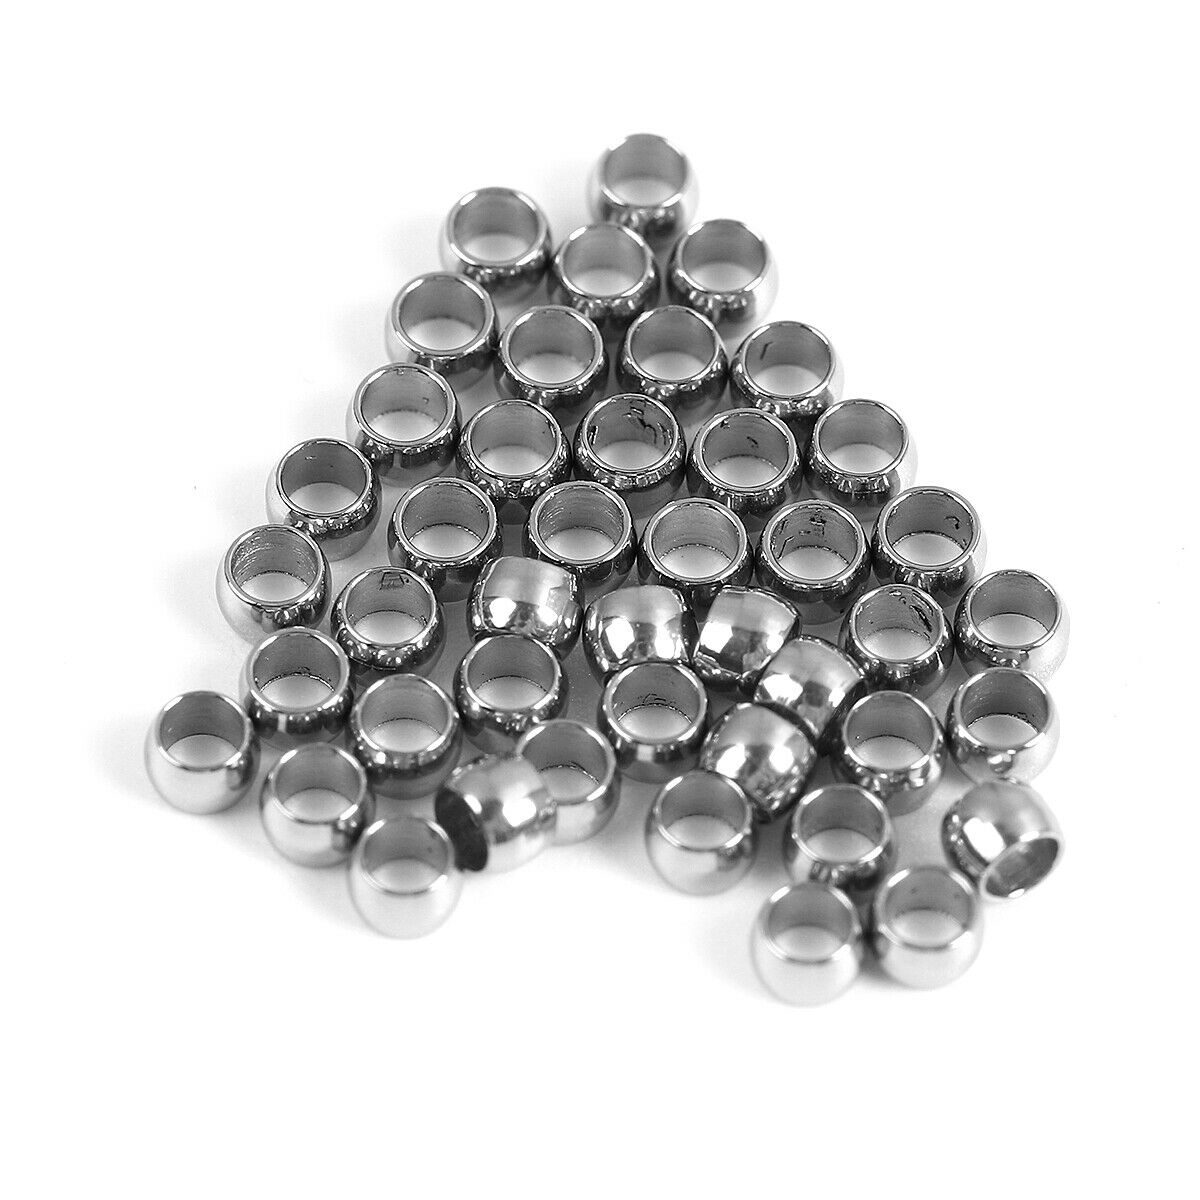 100 Stainless Steel Crimp Beads Cylinder Silver Tone-2mm( 1/8") Dia., Hole:1mm